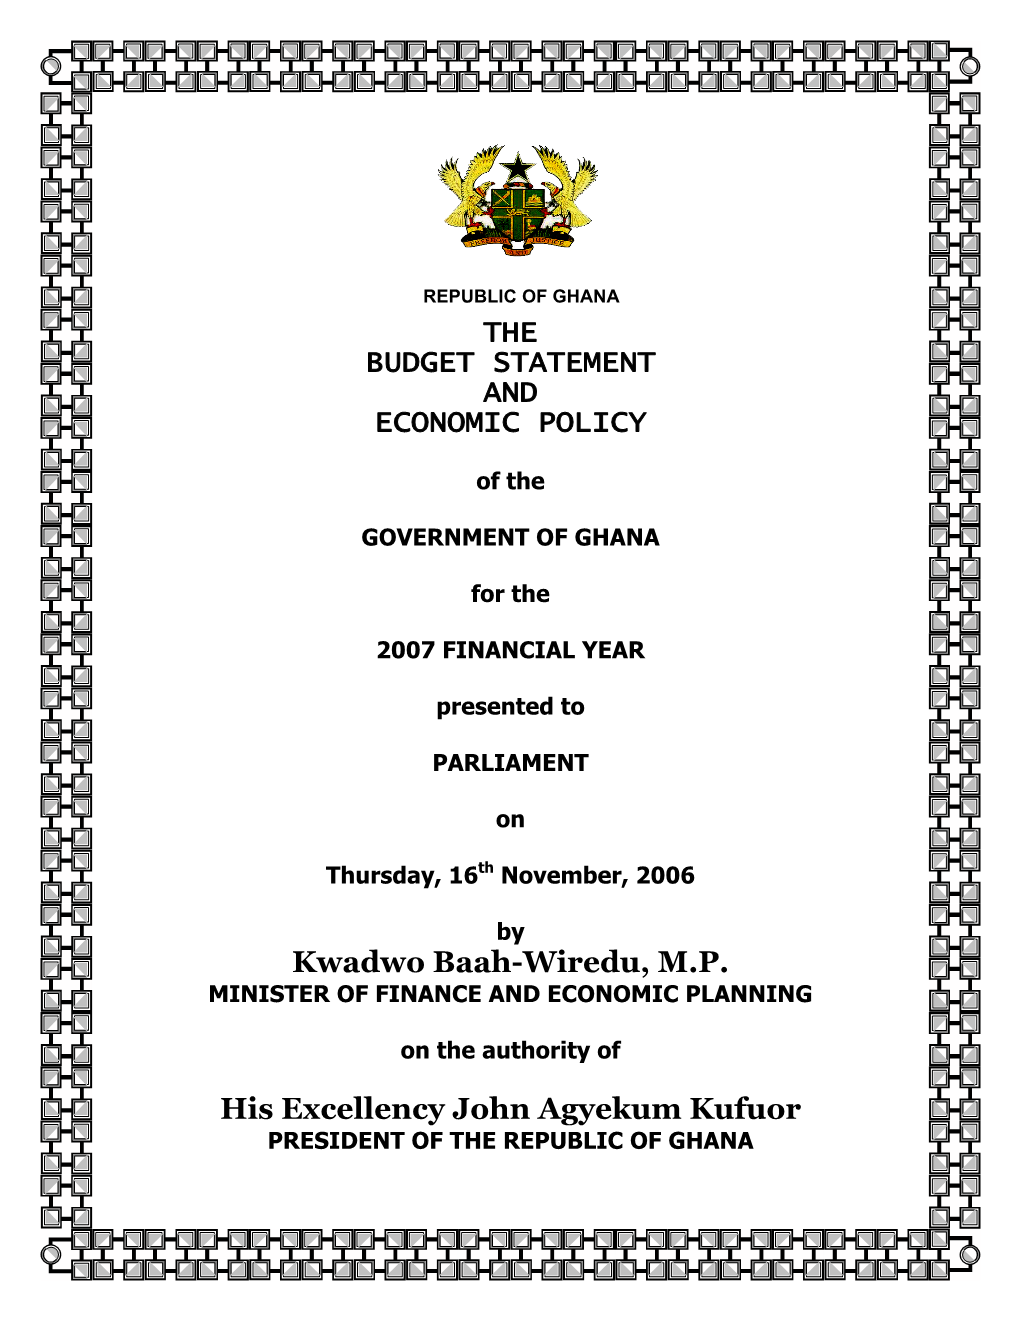 THE BUDGET STATEMENT and ECONOMIC POLICY Kwadwo Baah-Wiredu, M.P. His Excellency John Agyekum Kufuor